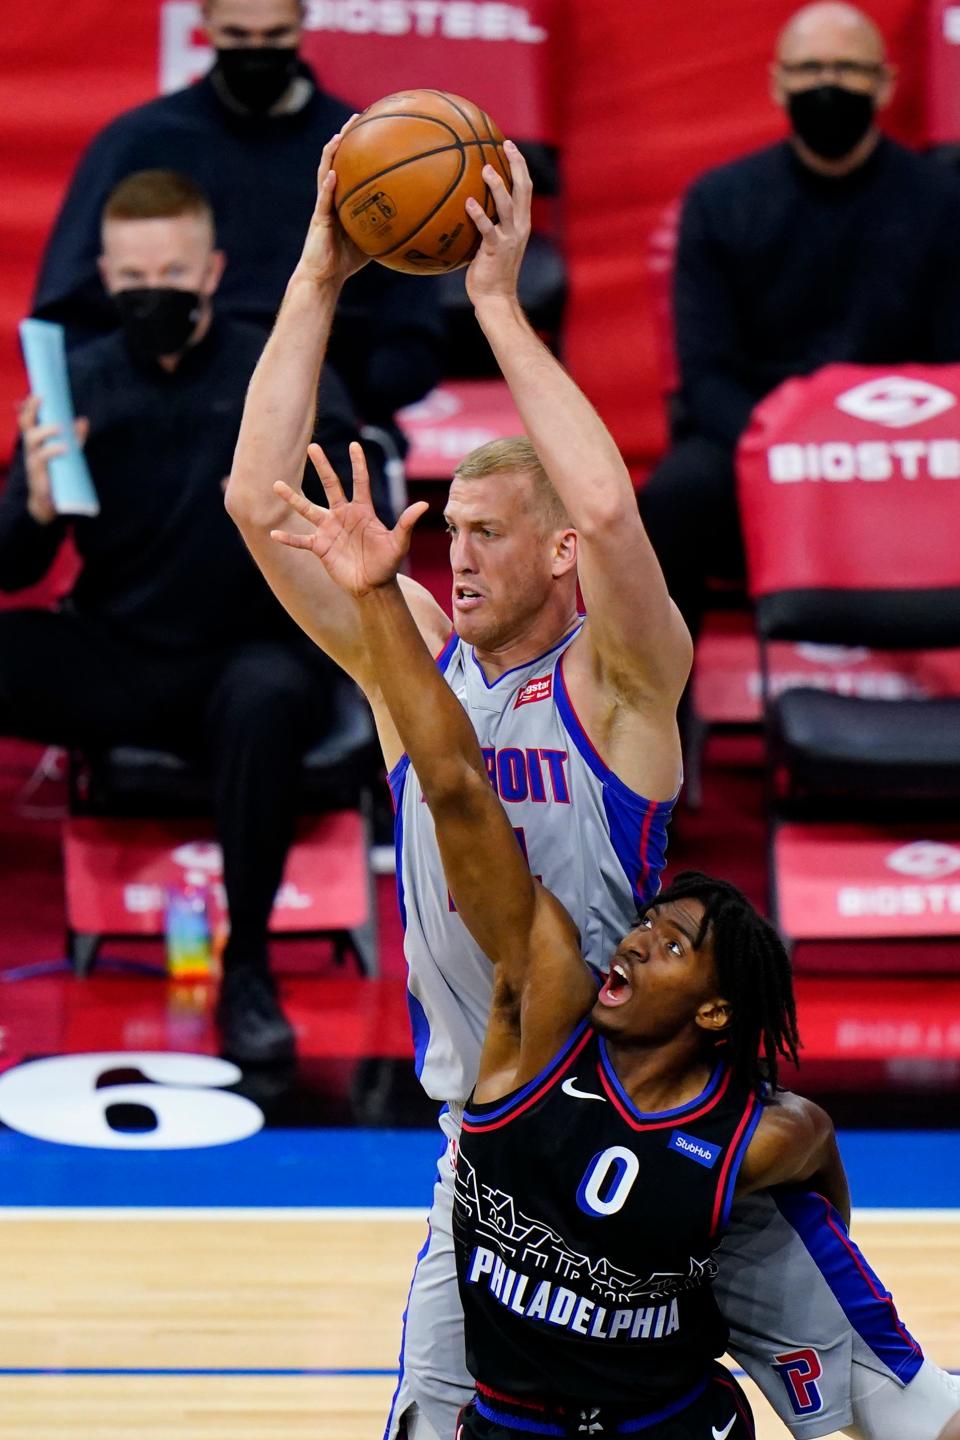 Detroit Pistons' Mason Plumlee, top, and Philadelphia 76ers' Tyrese Maxey leap for a rebound during the first half of an NBA basketball game, Saturday, May 8, 2021, in Philadelphia.